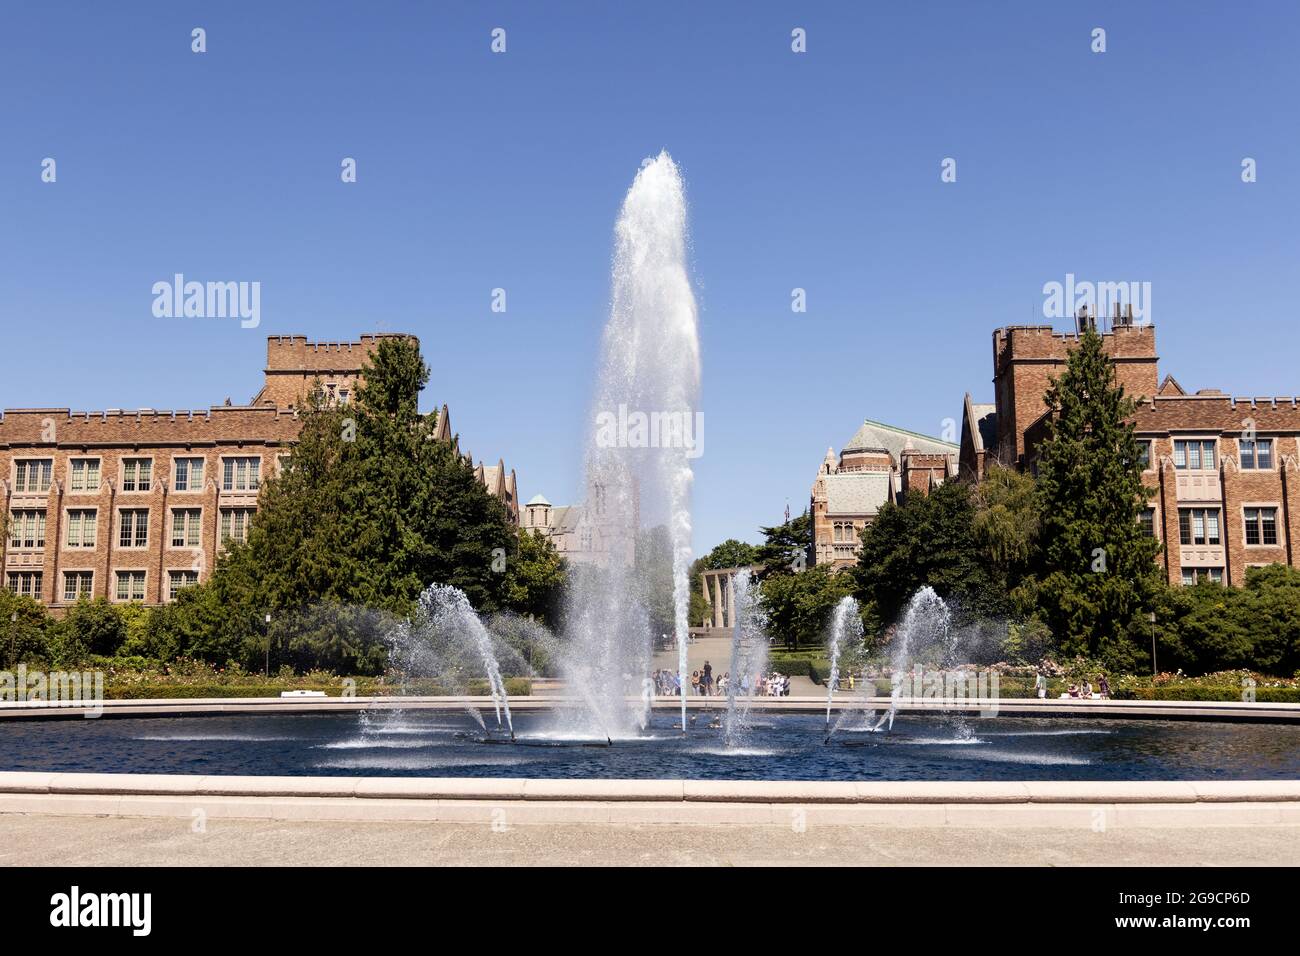 The Drumheller Fountain on the campus of the University of Washington in Seattle, WA, USA. Stock Photo